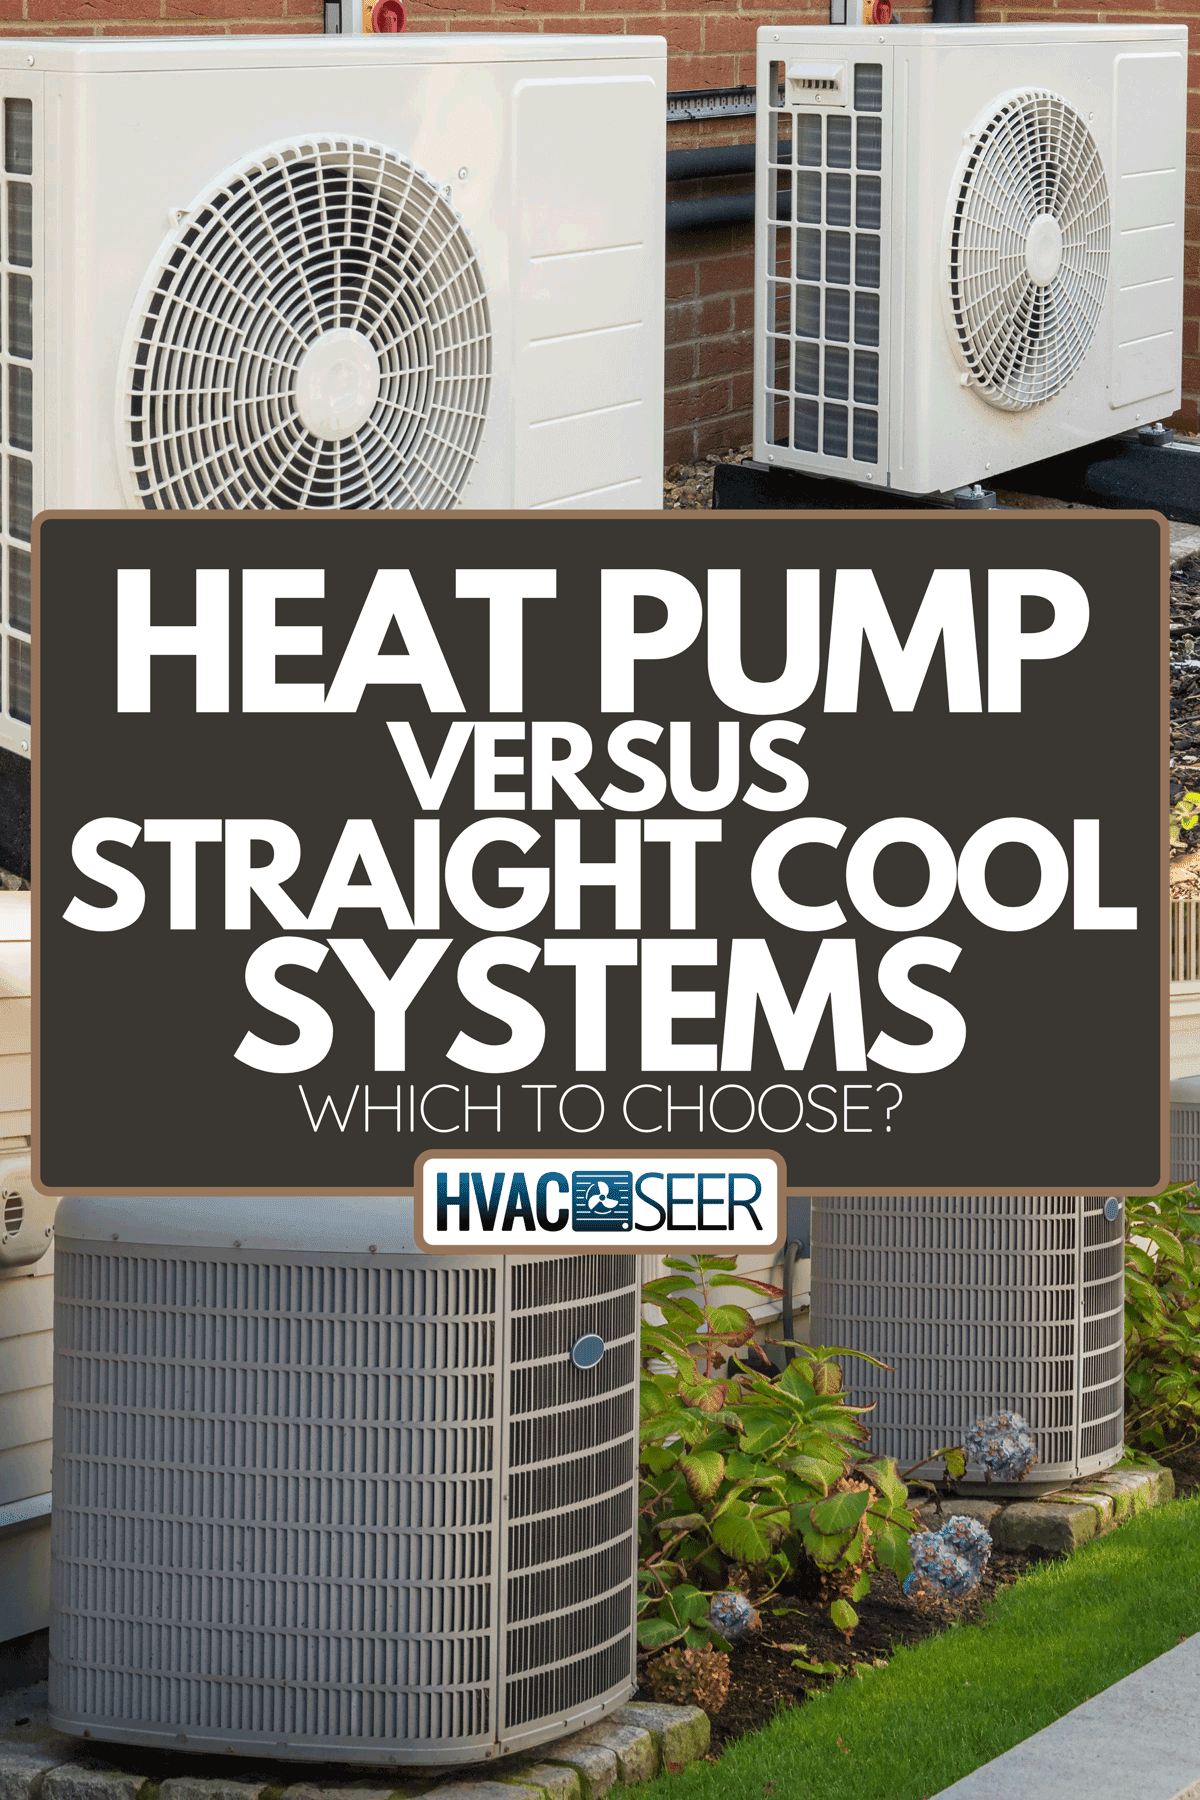 A comparison between Heat Pump and Straight Cool System, Heat Pump Vs. Straight Cool Systems: Which To Choose?